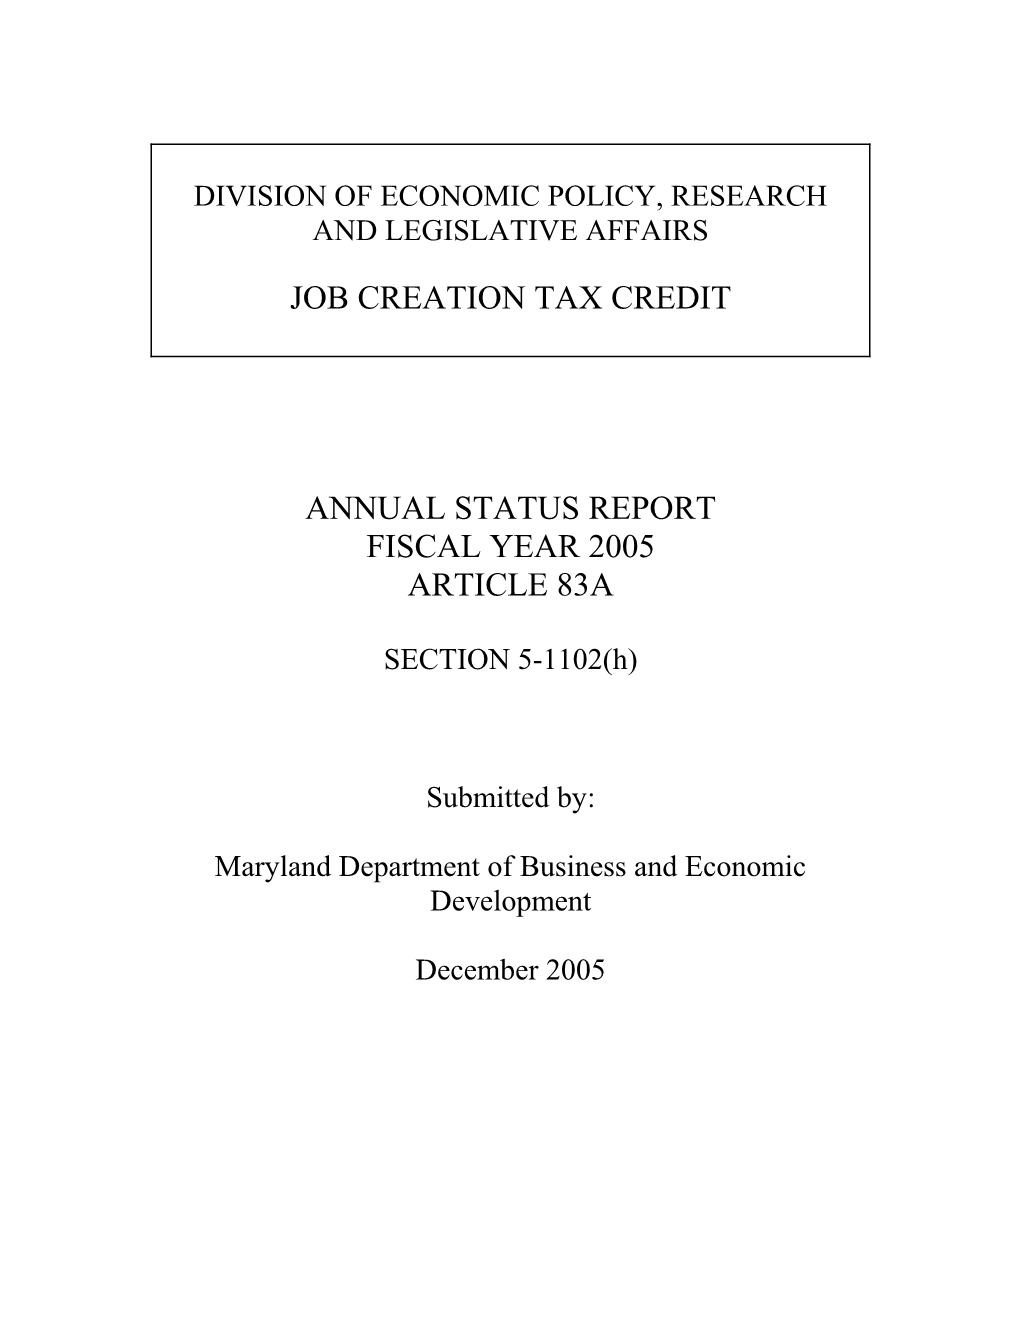 The Job Creation Tax Credit (JCTC) Was Enacted in 1996 to Provide Income Tax Credits To